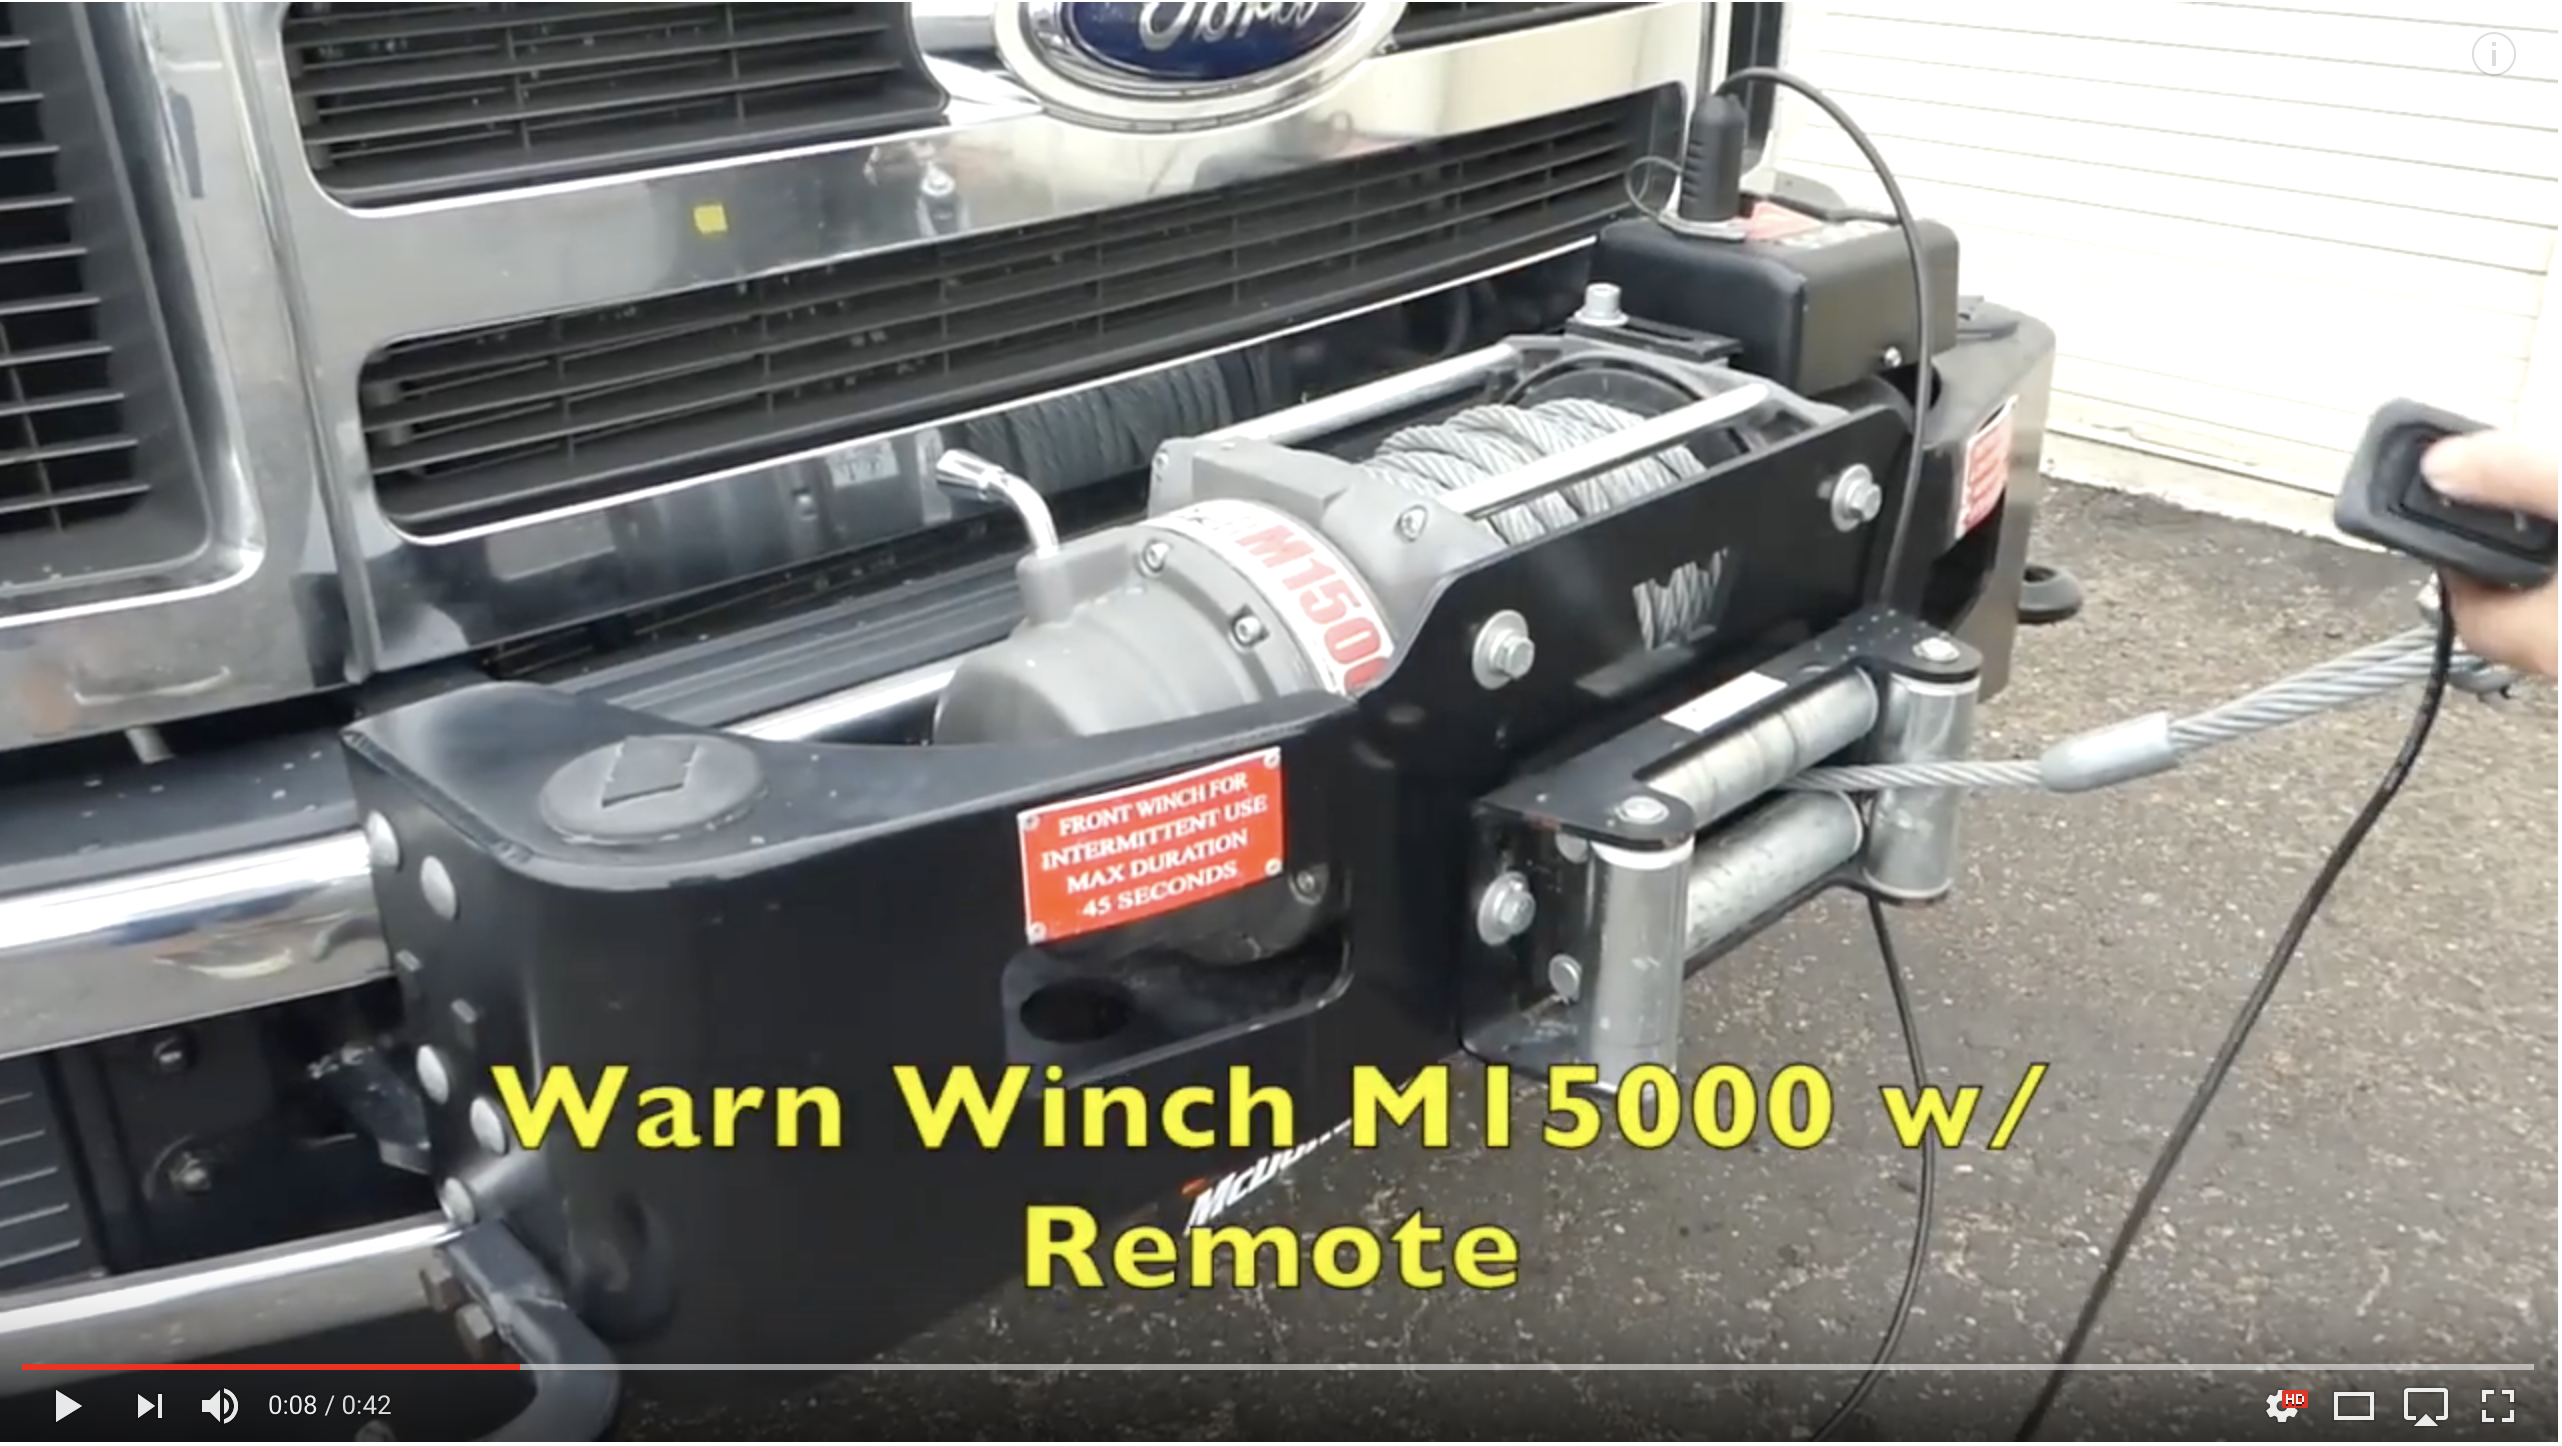 2010 Ford F-450 4 x 4 Servive Truck w/ Winch & Generator on YouTube